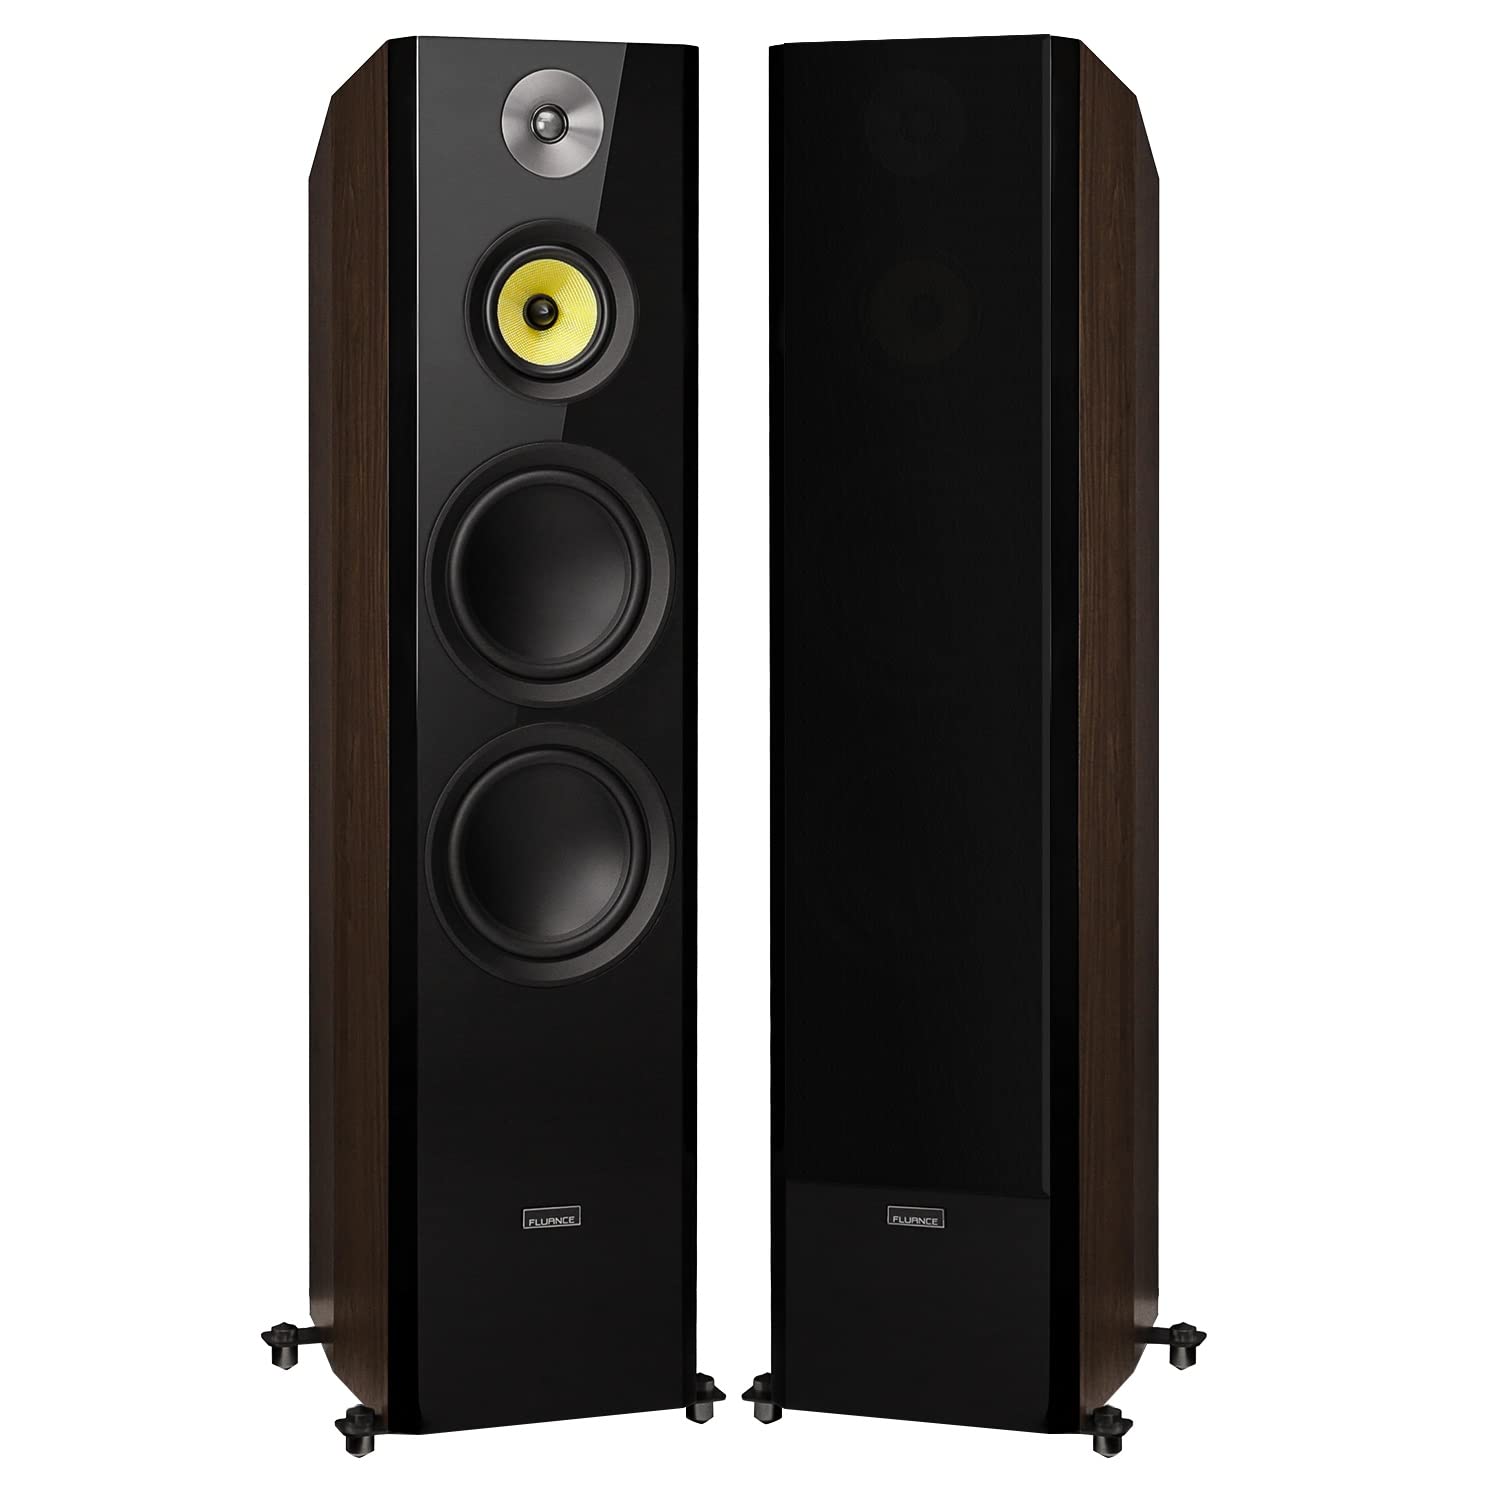 Fluance Signature HiFi Surround Sound Home Theater 5.1 Channel Speaker System Including 3-Way Floorstanding Towers, Center Channel, Bipolar Speakers and DB10 Subwoofer - Natural Walnut (HF51WB)